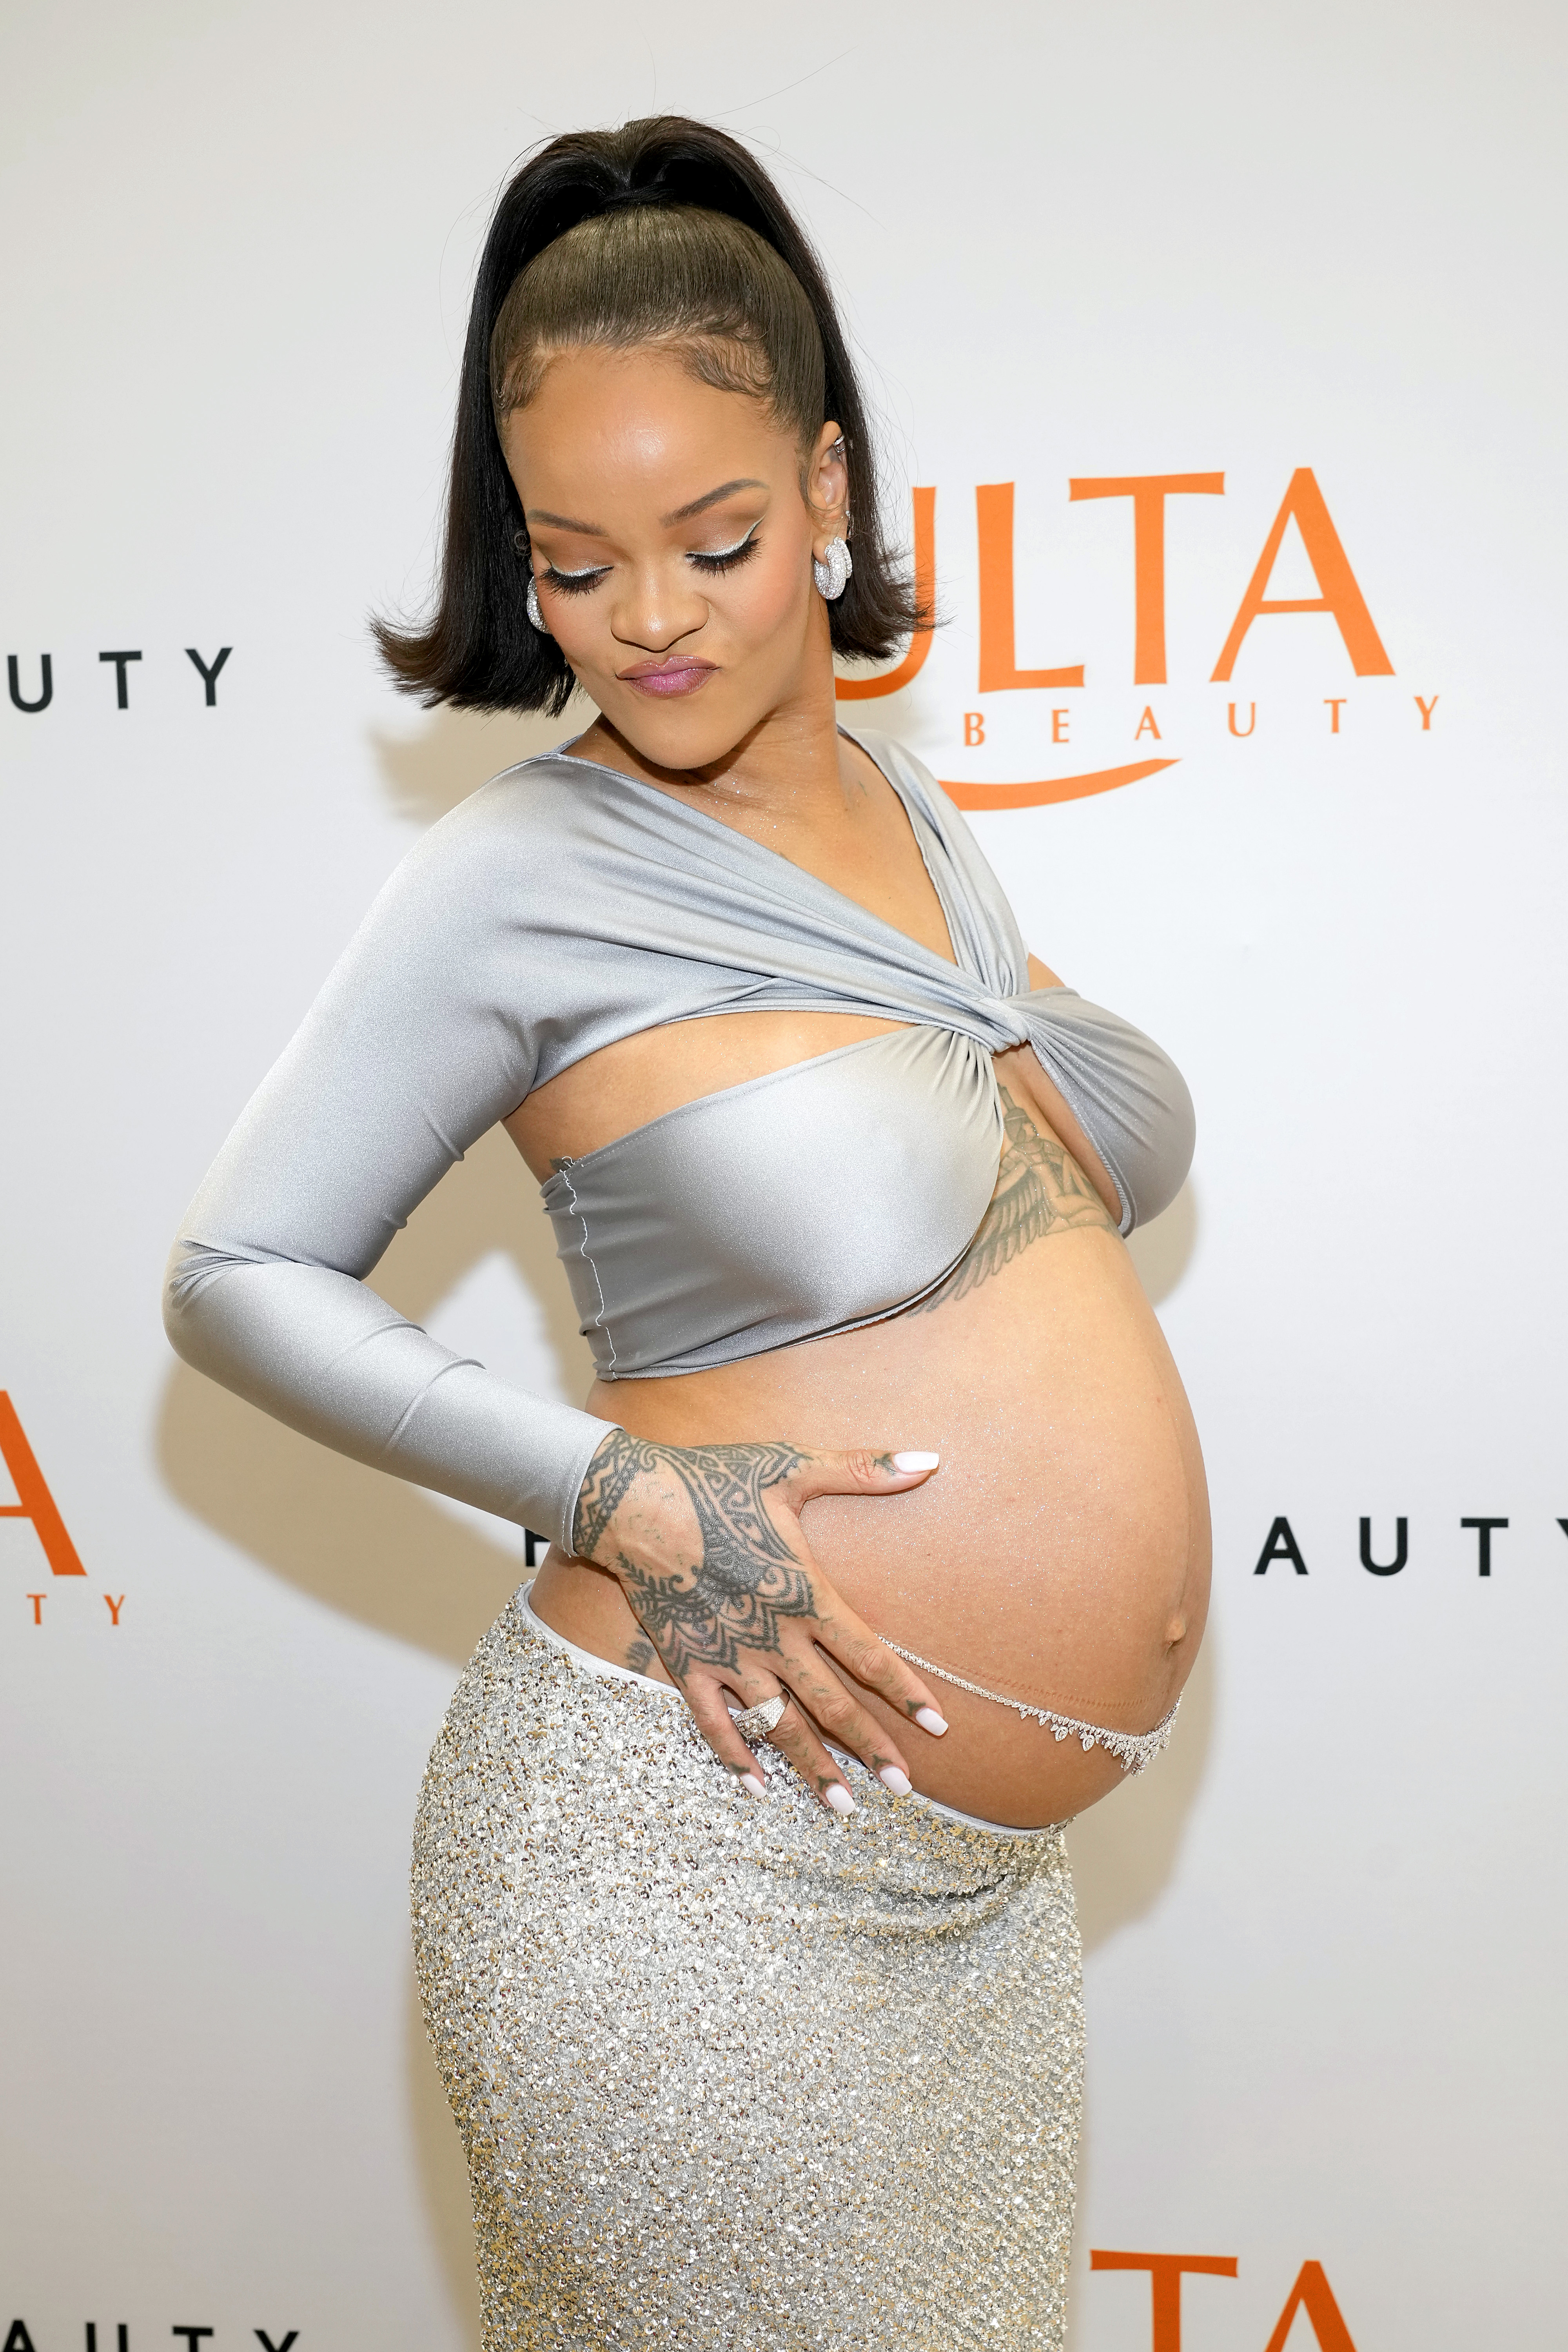 Rihanna at the launch of Fenty Beauty at ULTA Beauty on March 12, 2022, in Los Angeles, California. | Source: Getty Images